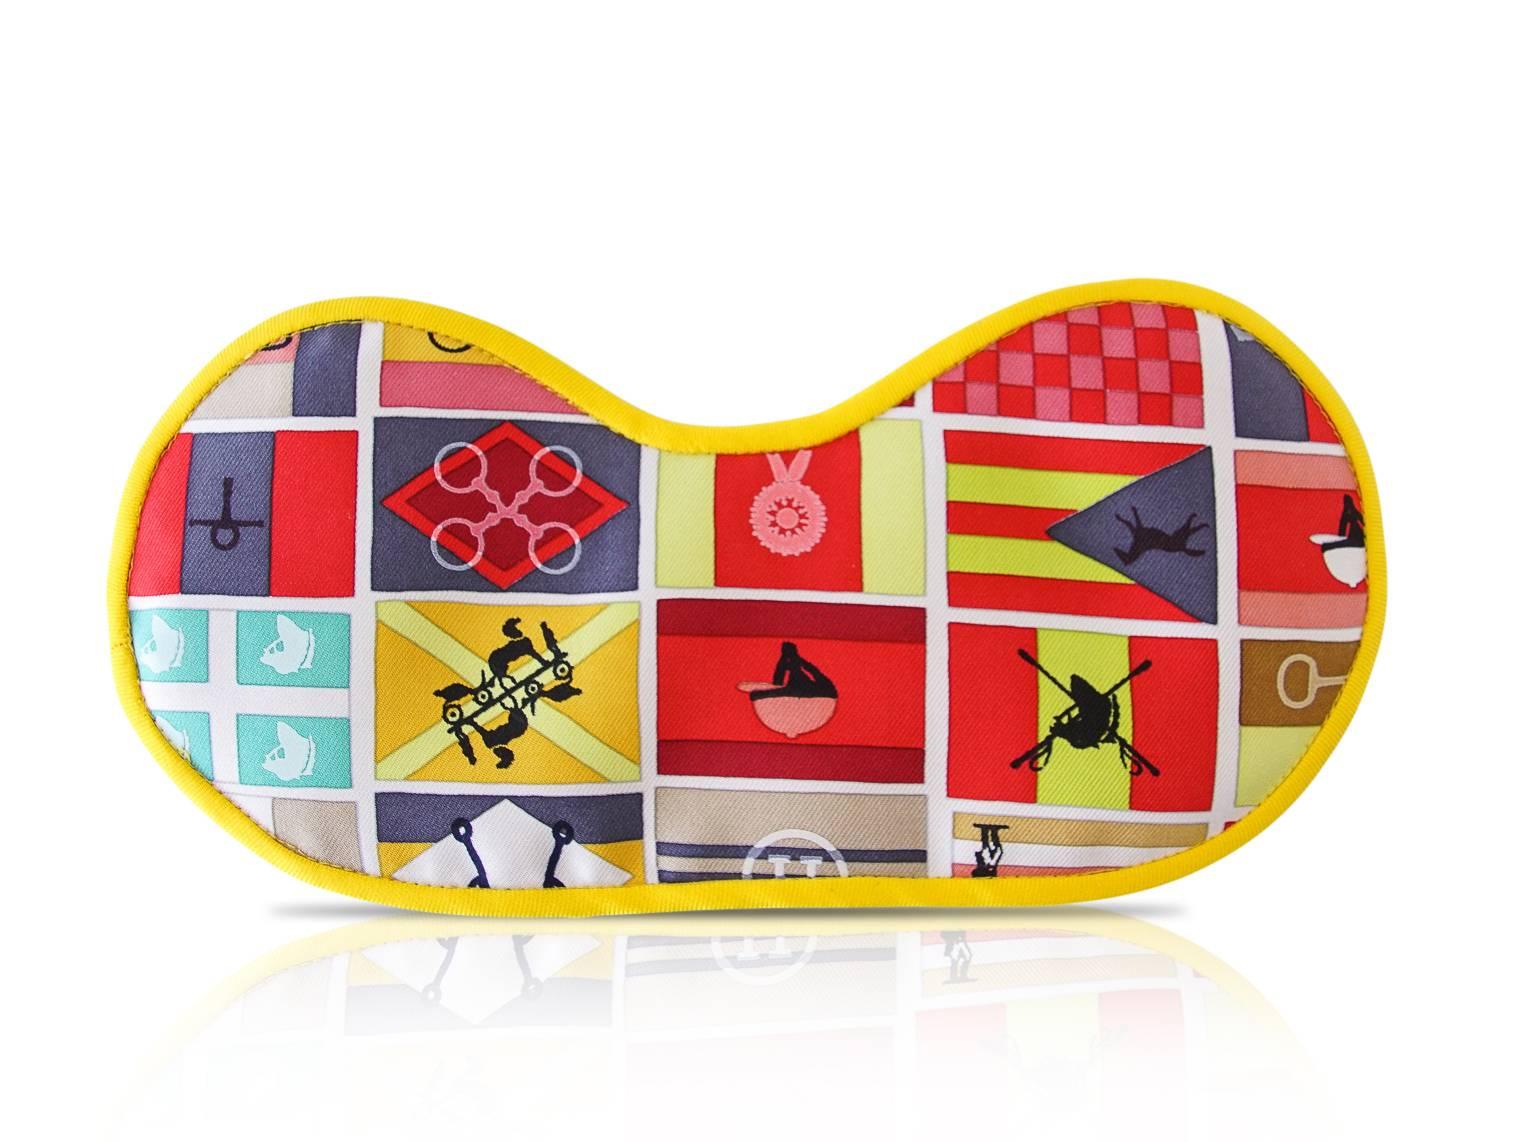 Guaranteed authentic Hermes Petit h scarf print equestrian motif silk sleep eye mask.
Yellow with taupes, reds, greens and pink.
Rear is solid.
Light weight and very soft.
Great for traveling.
Comes with Hermes box.
Treat yourself or a friend to a